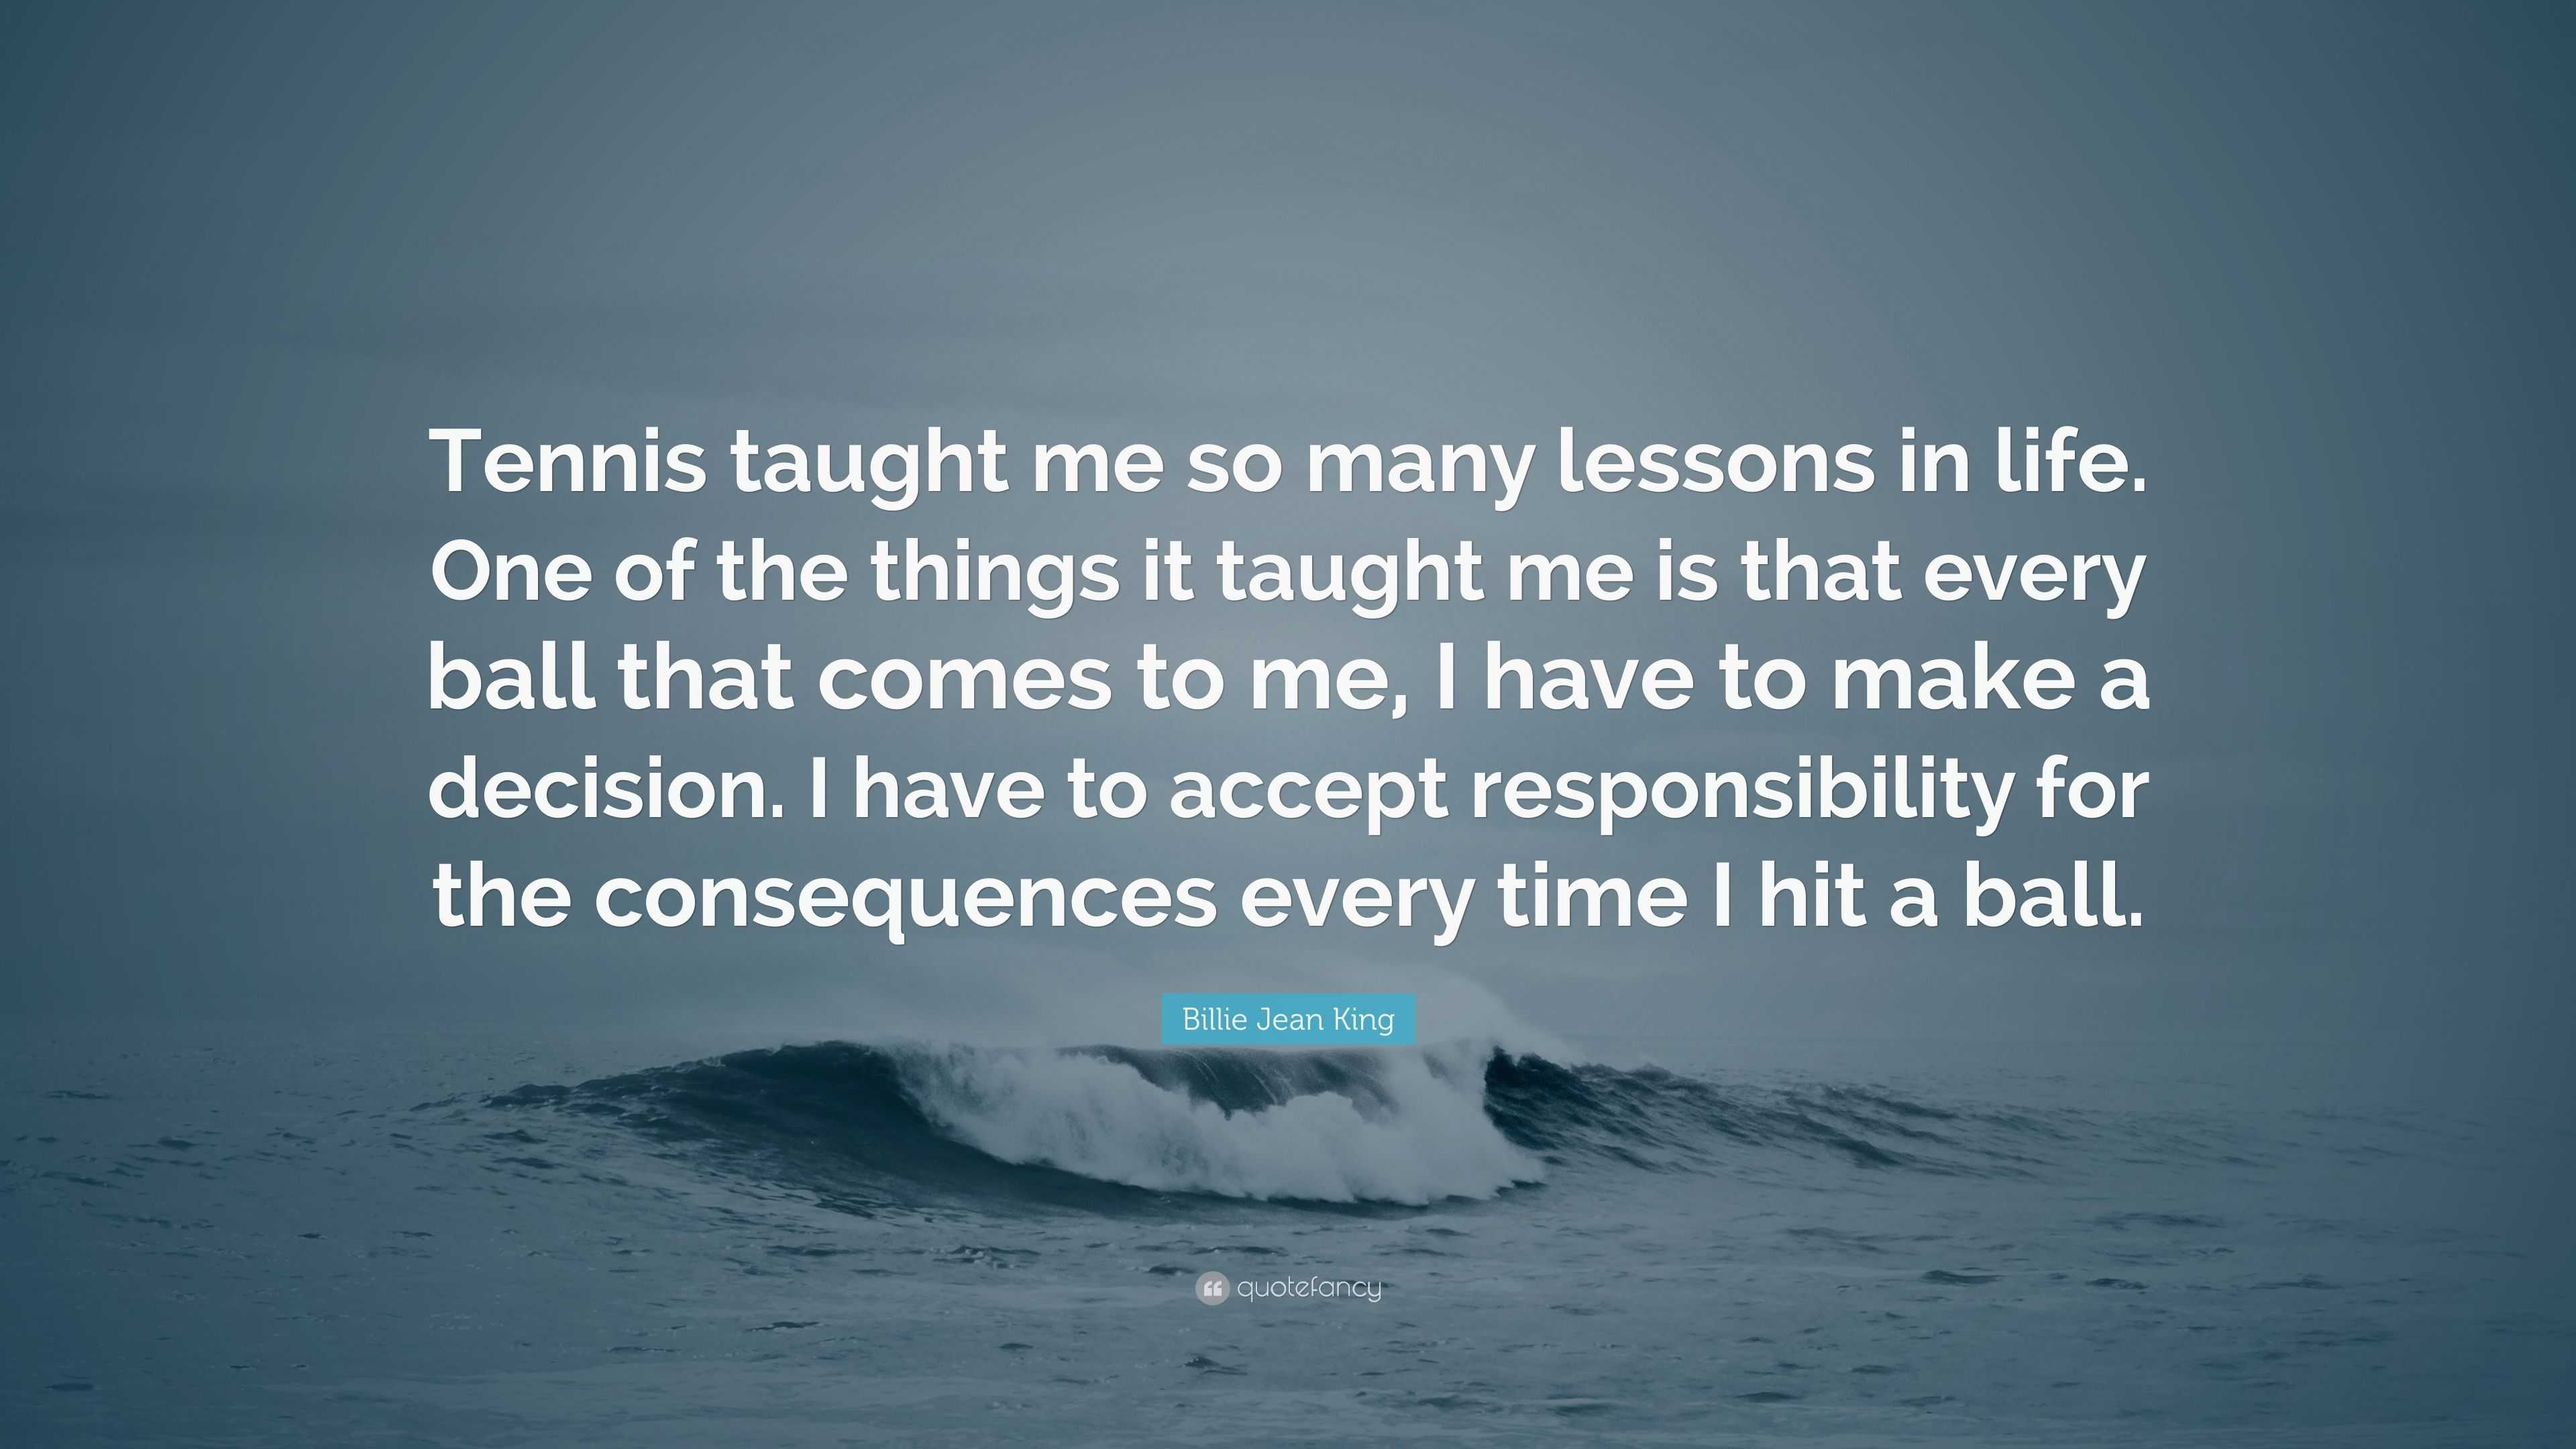 Billie Jean King Quote “Tennis taught me so many lessons in life e